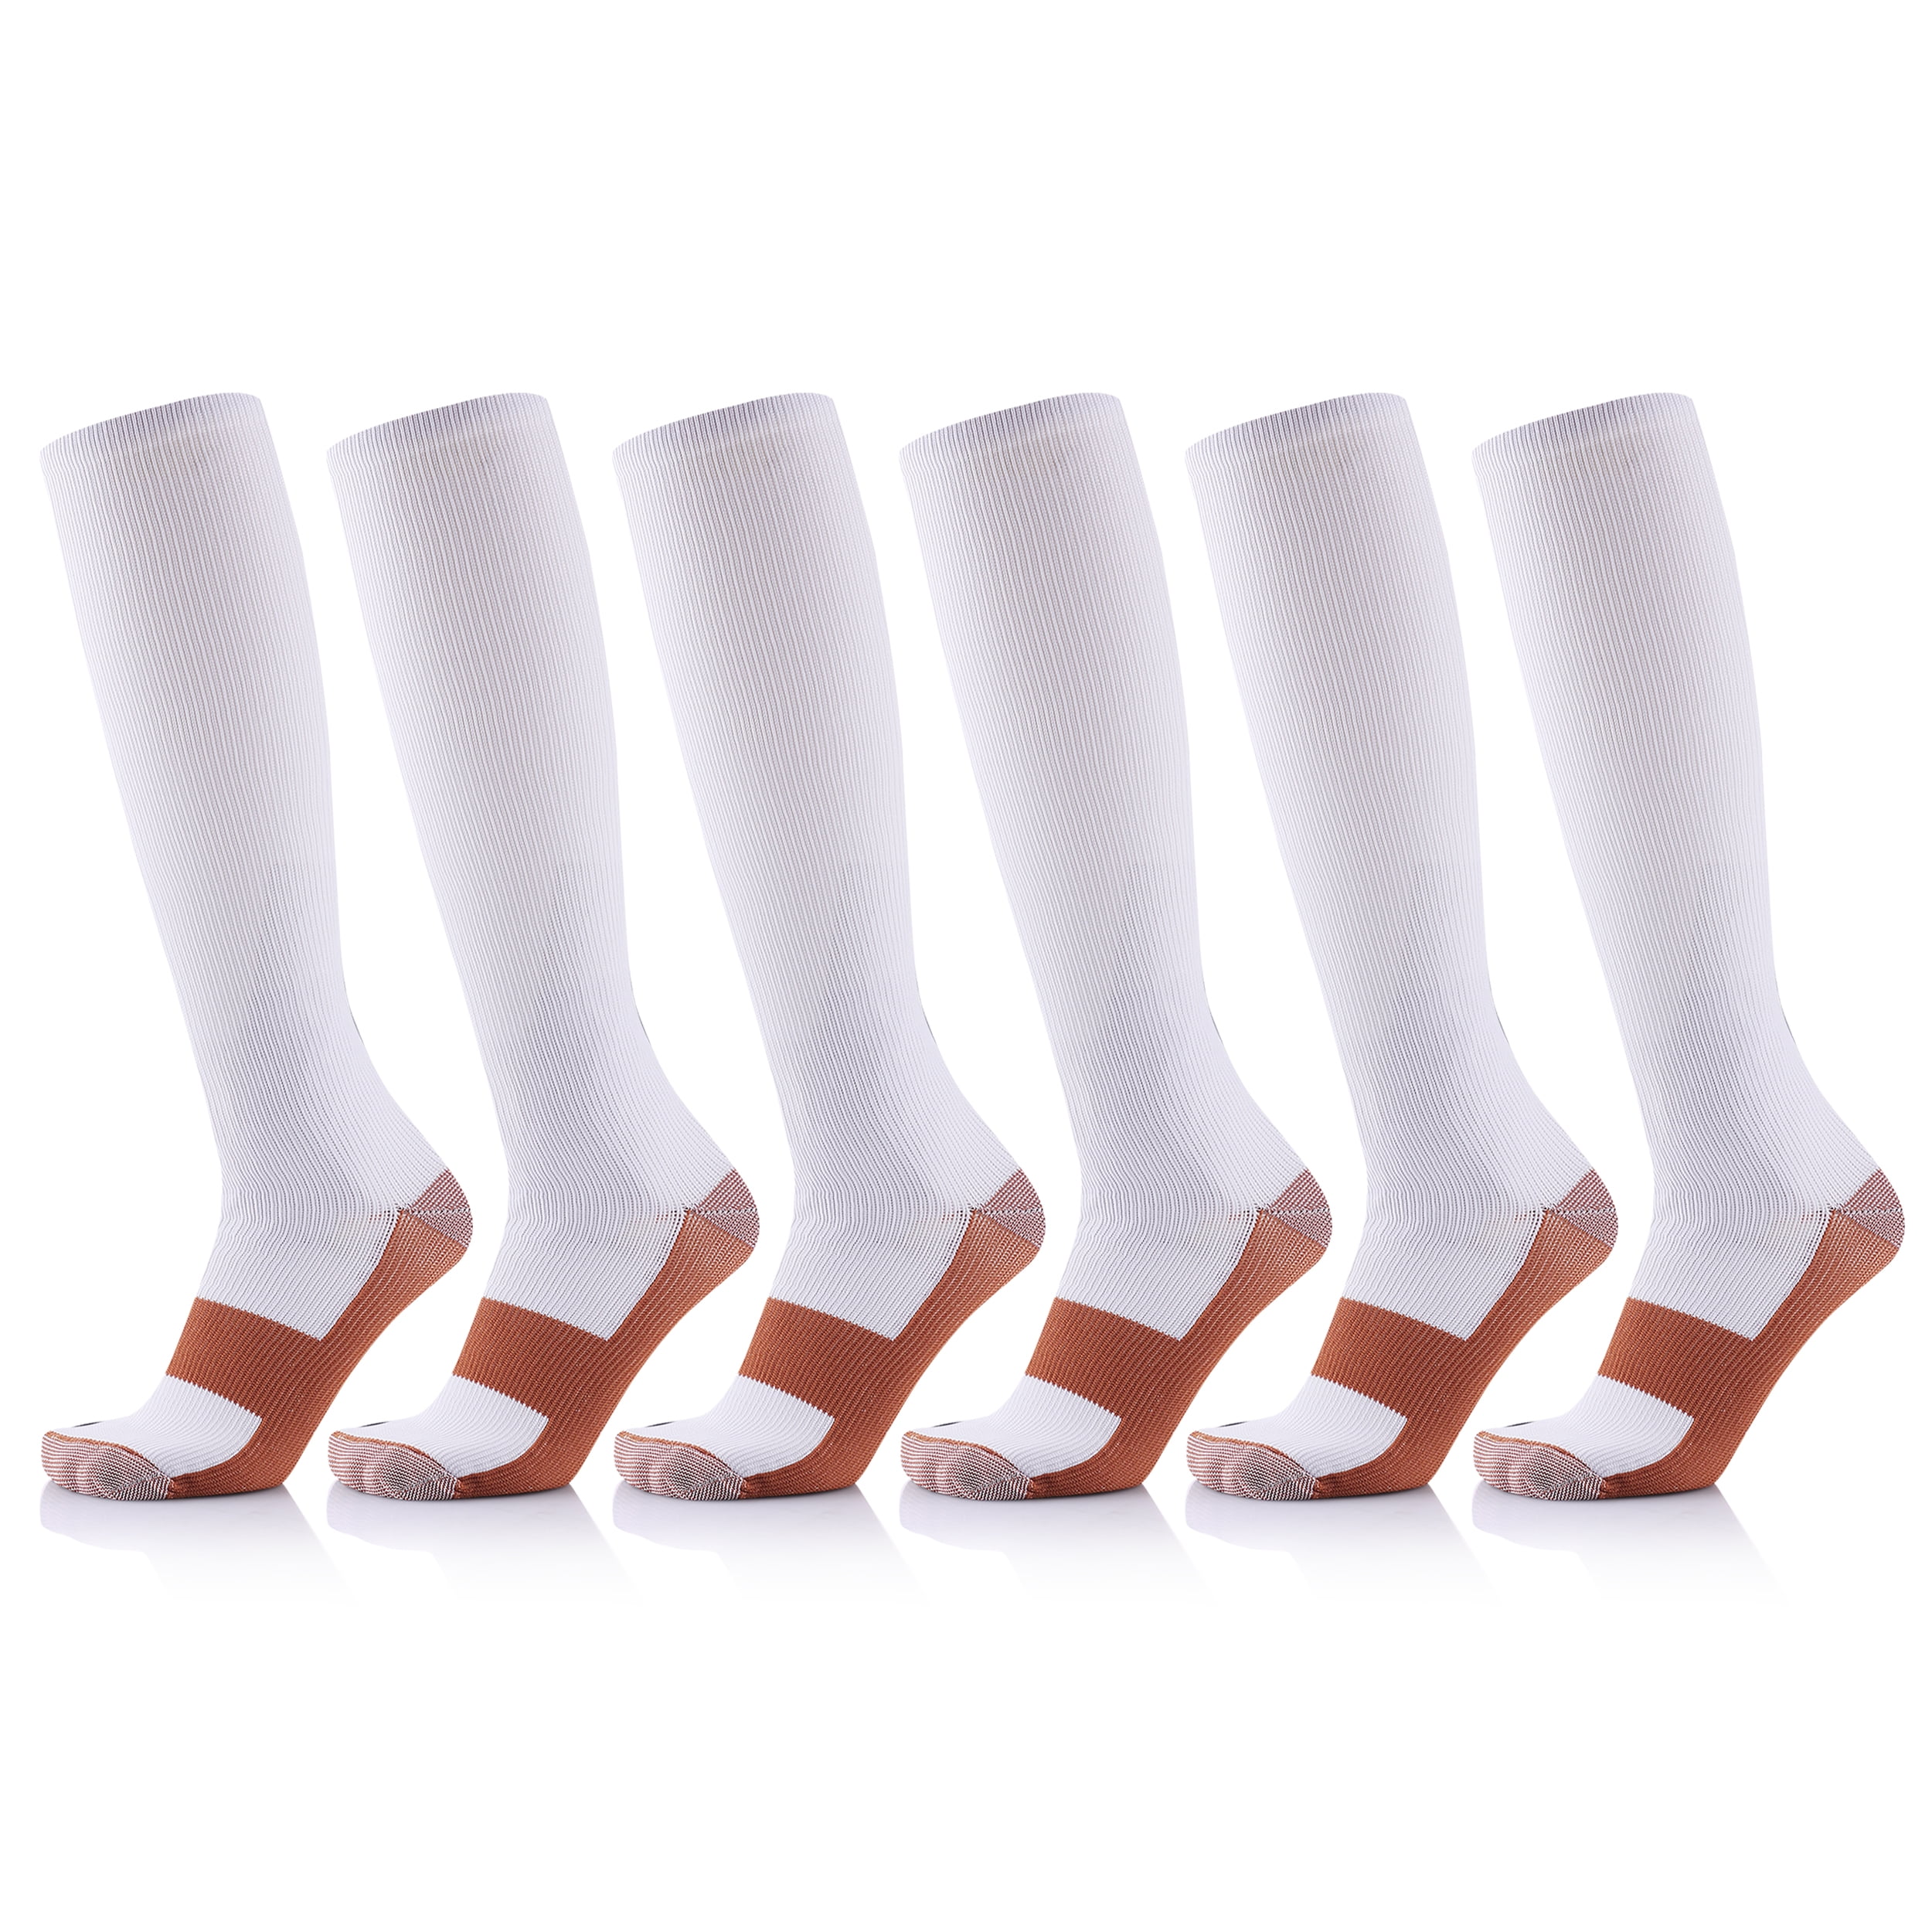 Extreme Fit Copper-Infused High-Energy Unisex Compression Socks, 6 Pack 